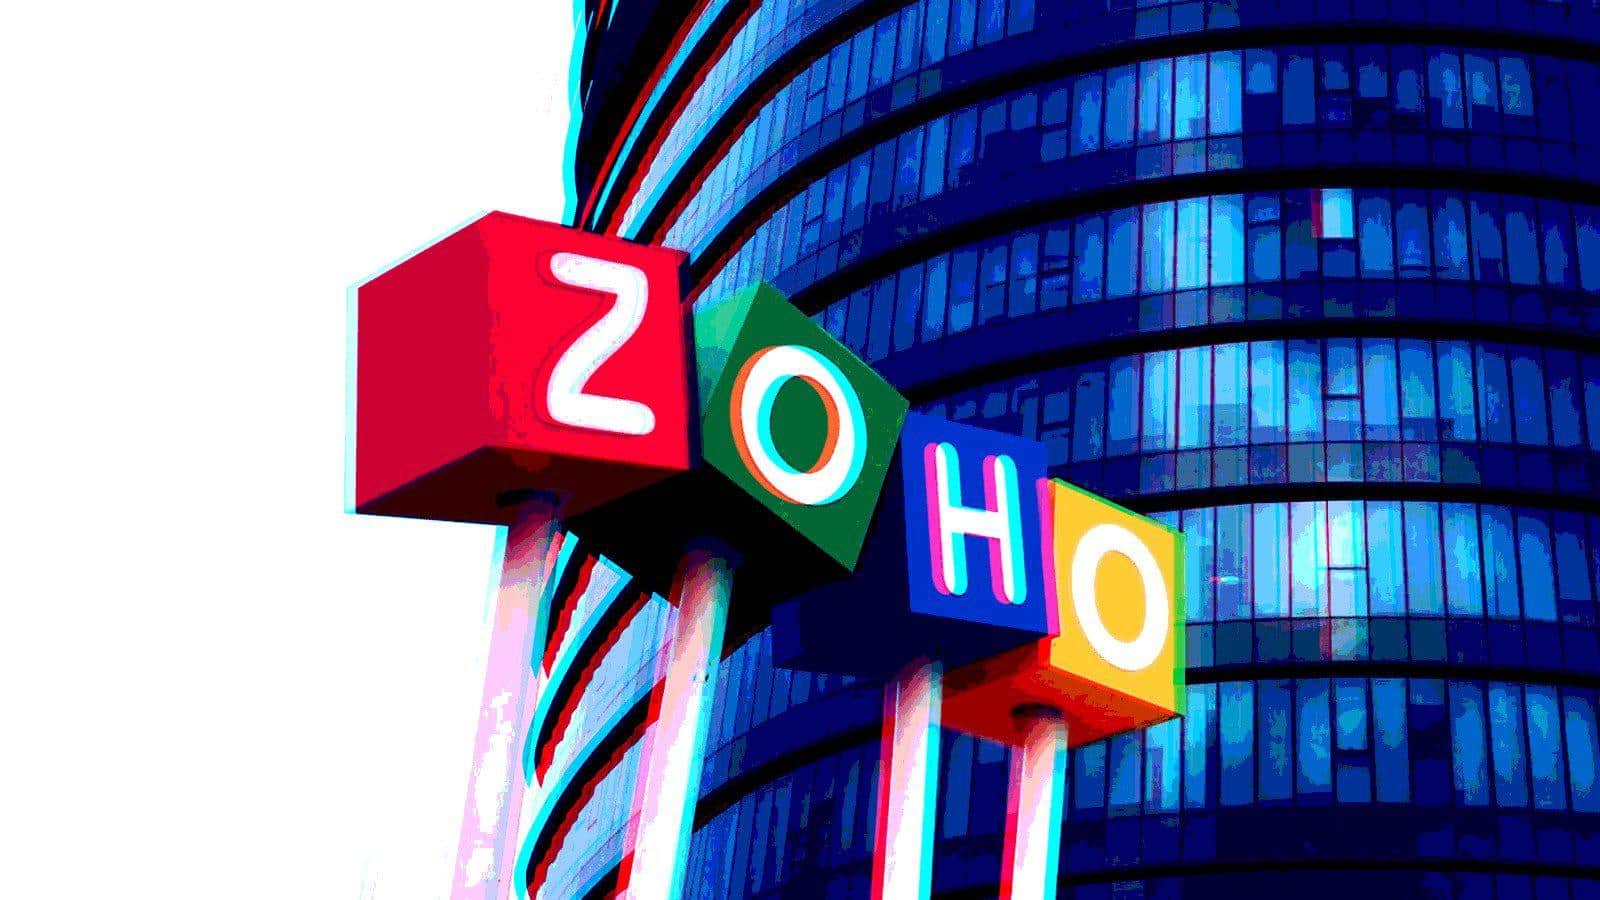 Researchers to release PoC exploit for critical Zoho RCE bug, patch now